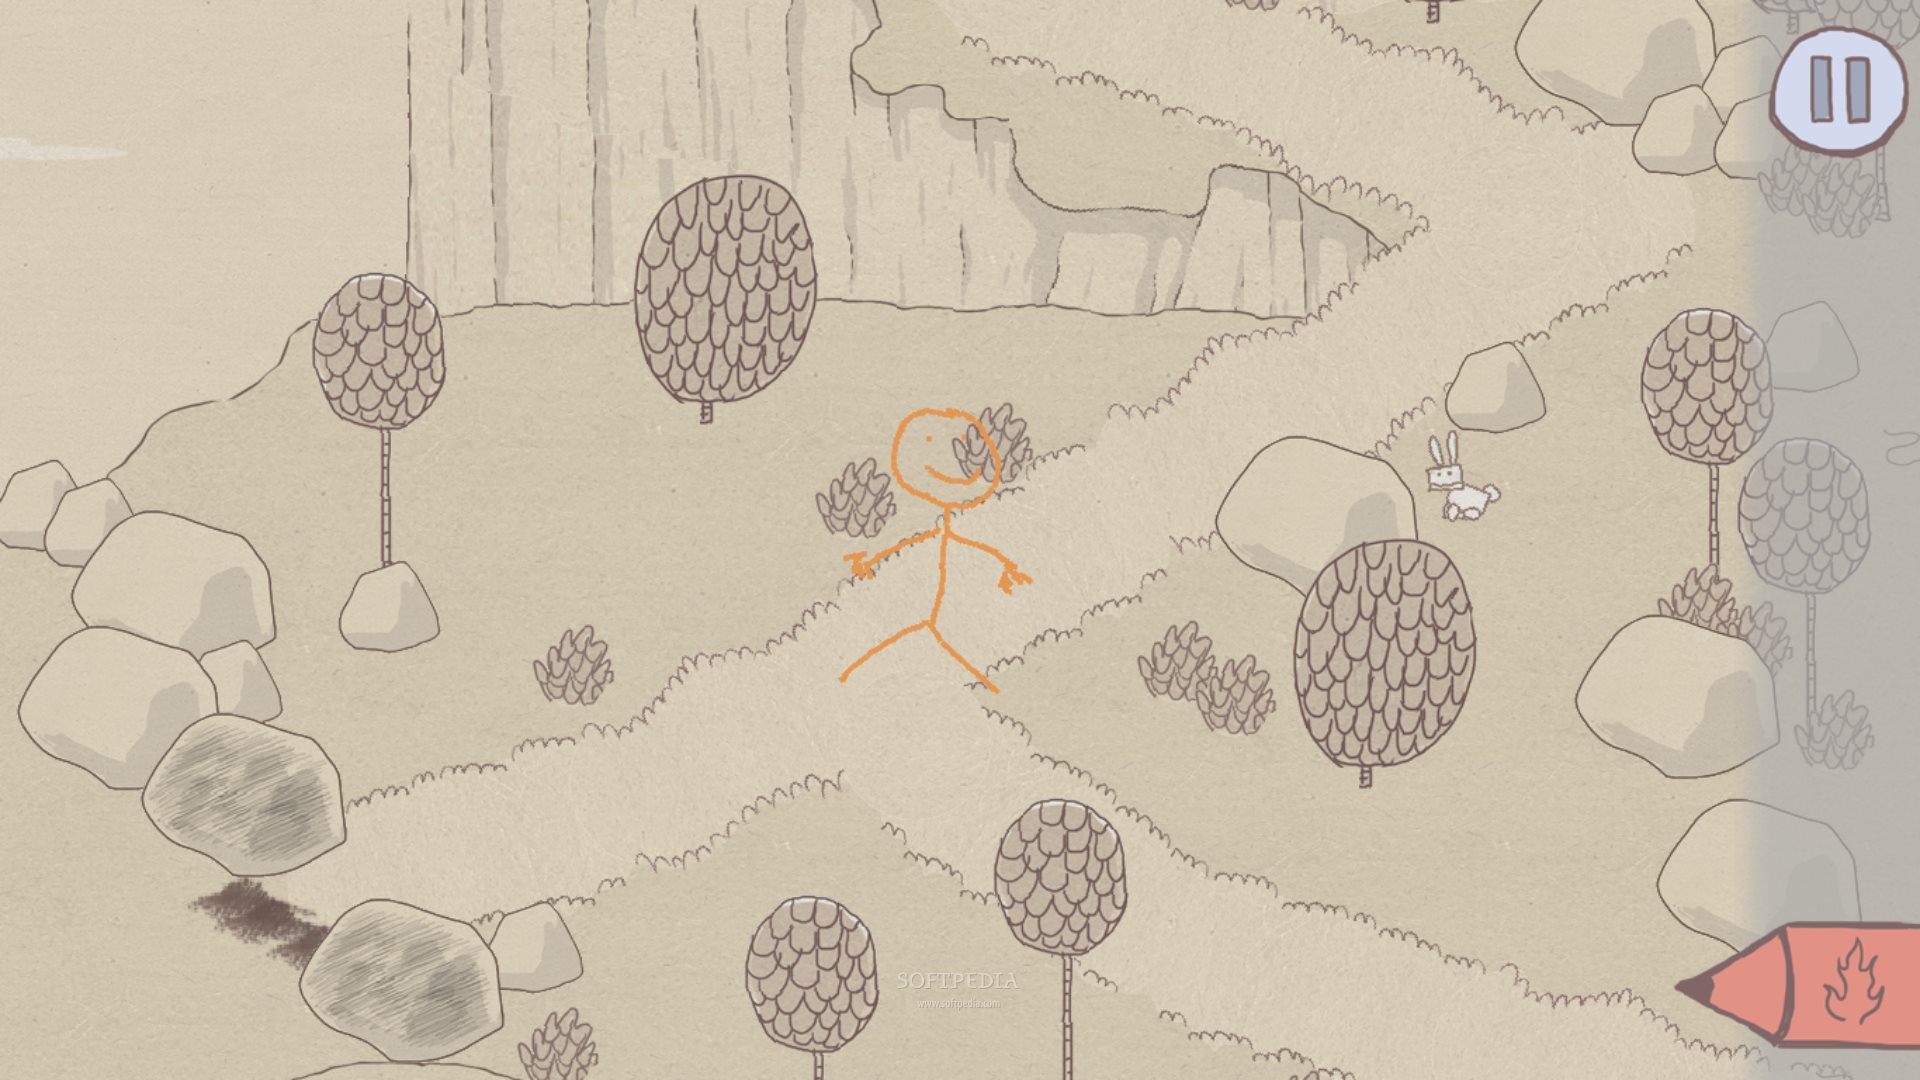 instal the last version for ios Draw a Stickman: EPIC Free